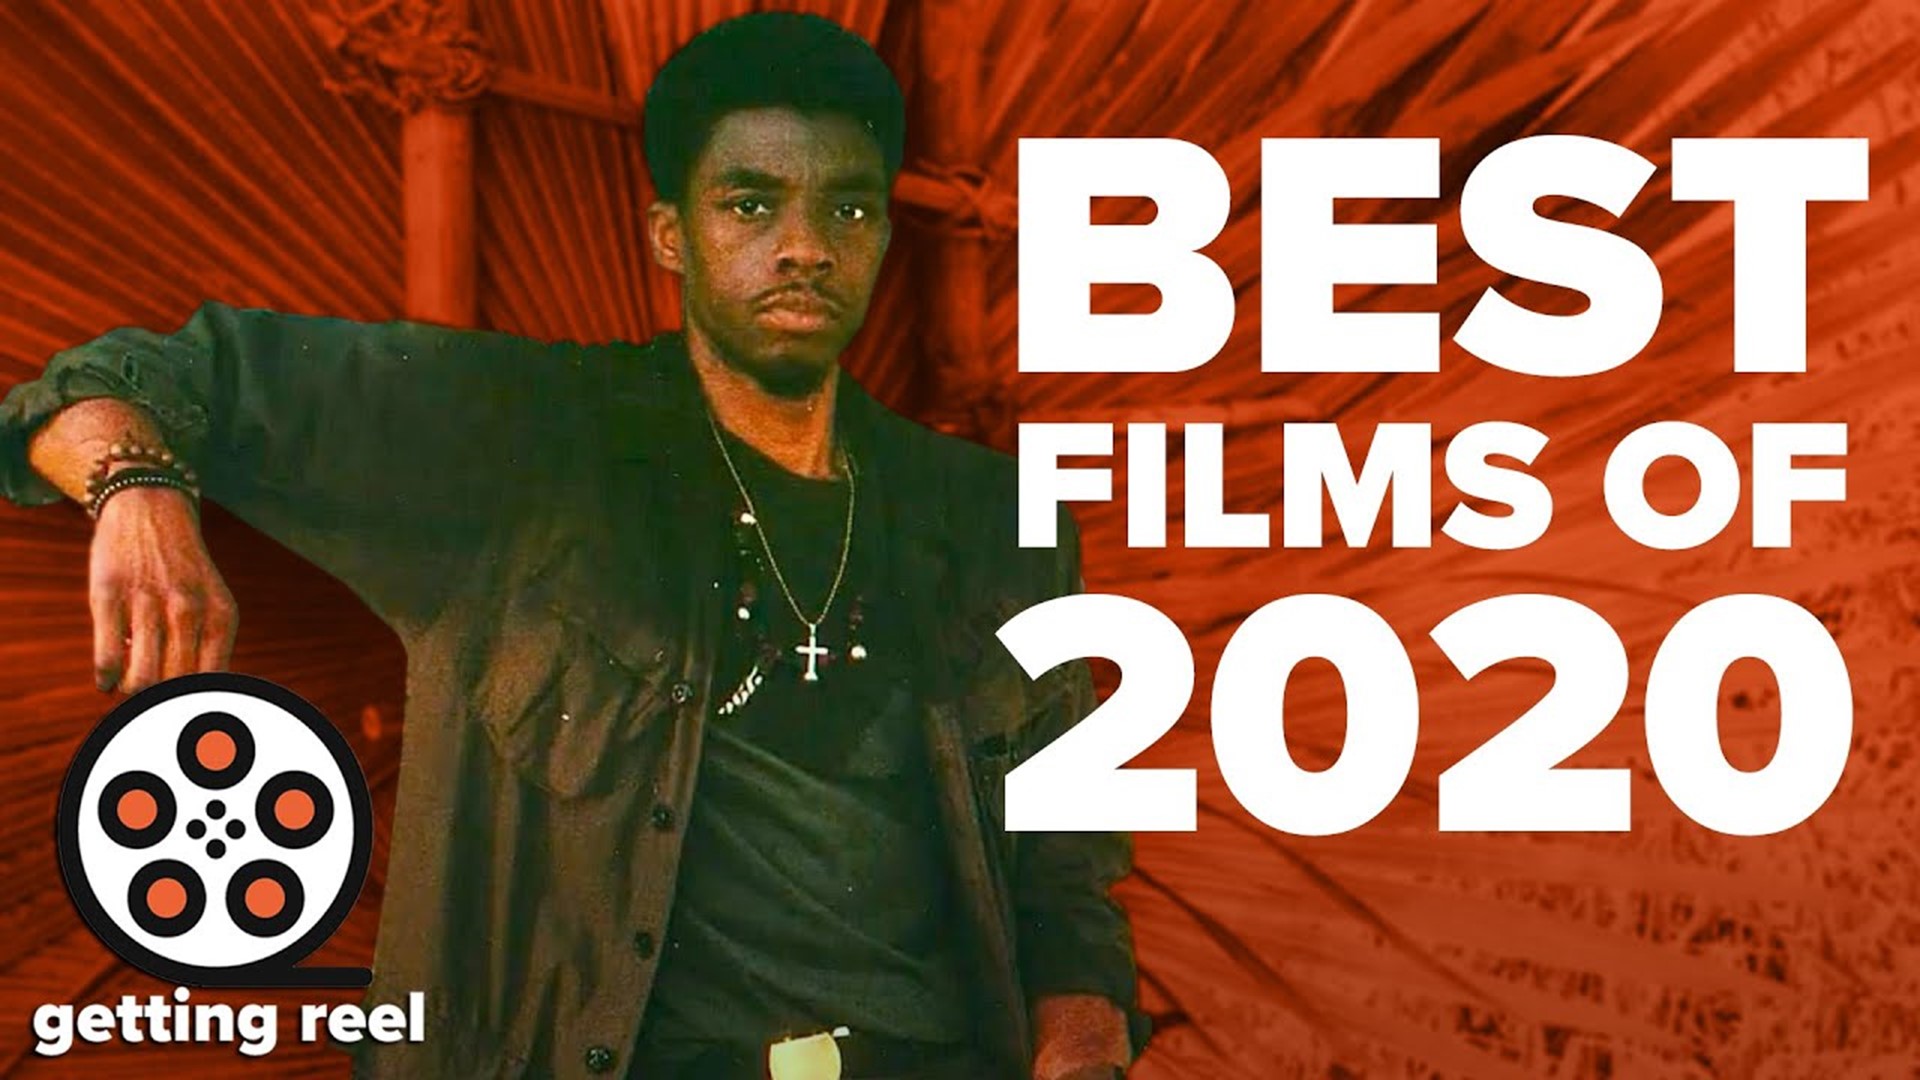 Although 2020 has seen a lot of movies delayed or rescheduled, we still got to see two iconic performances from Chadwick Boseman and plenty more.